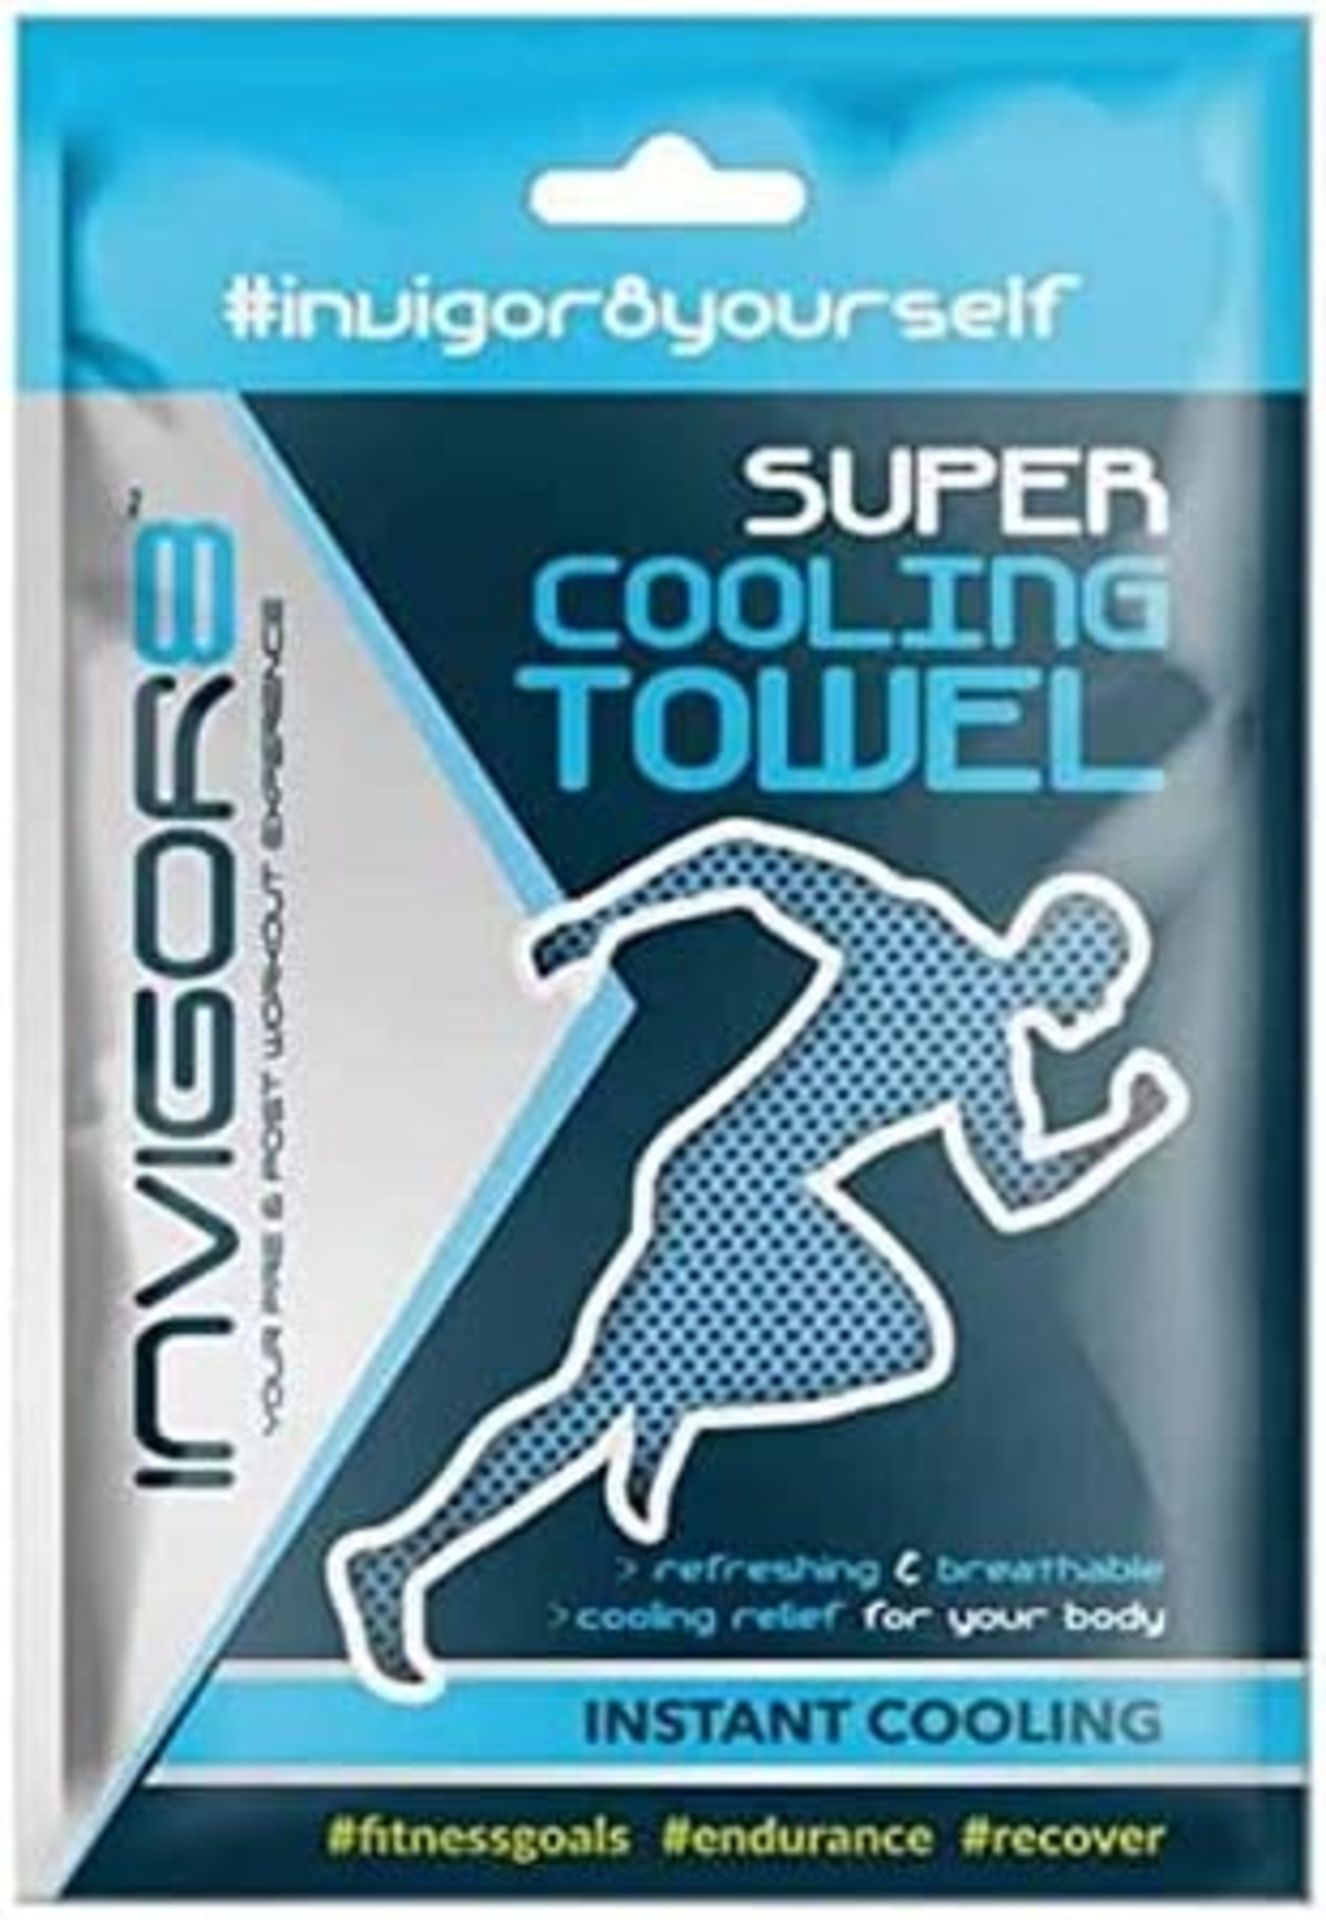 14 x Invigor 8 Towel - Refreshing & Breathable - Cooling Relief For Your Body RRP £4.99 ea